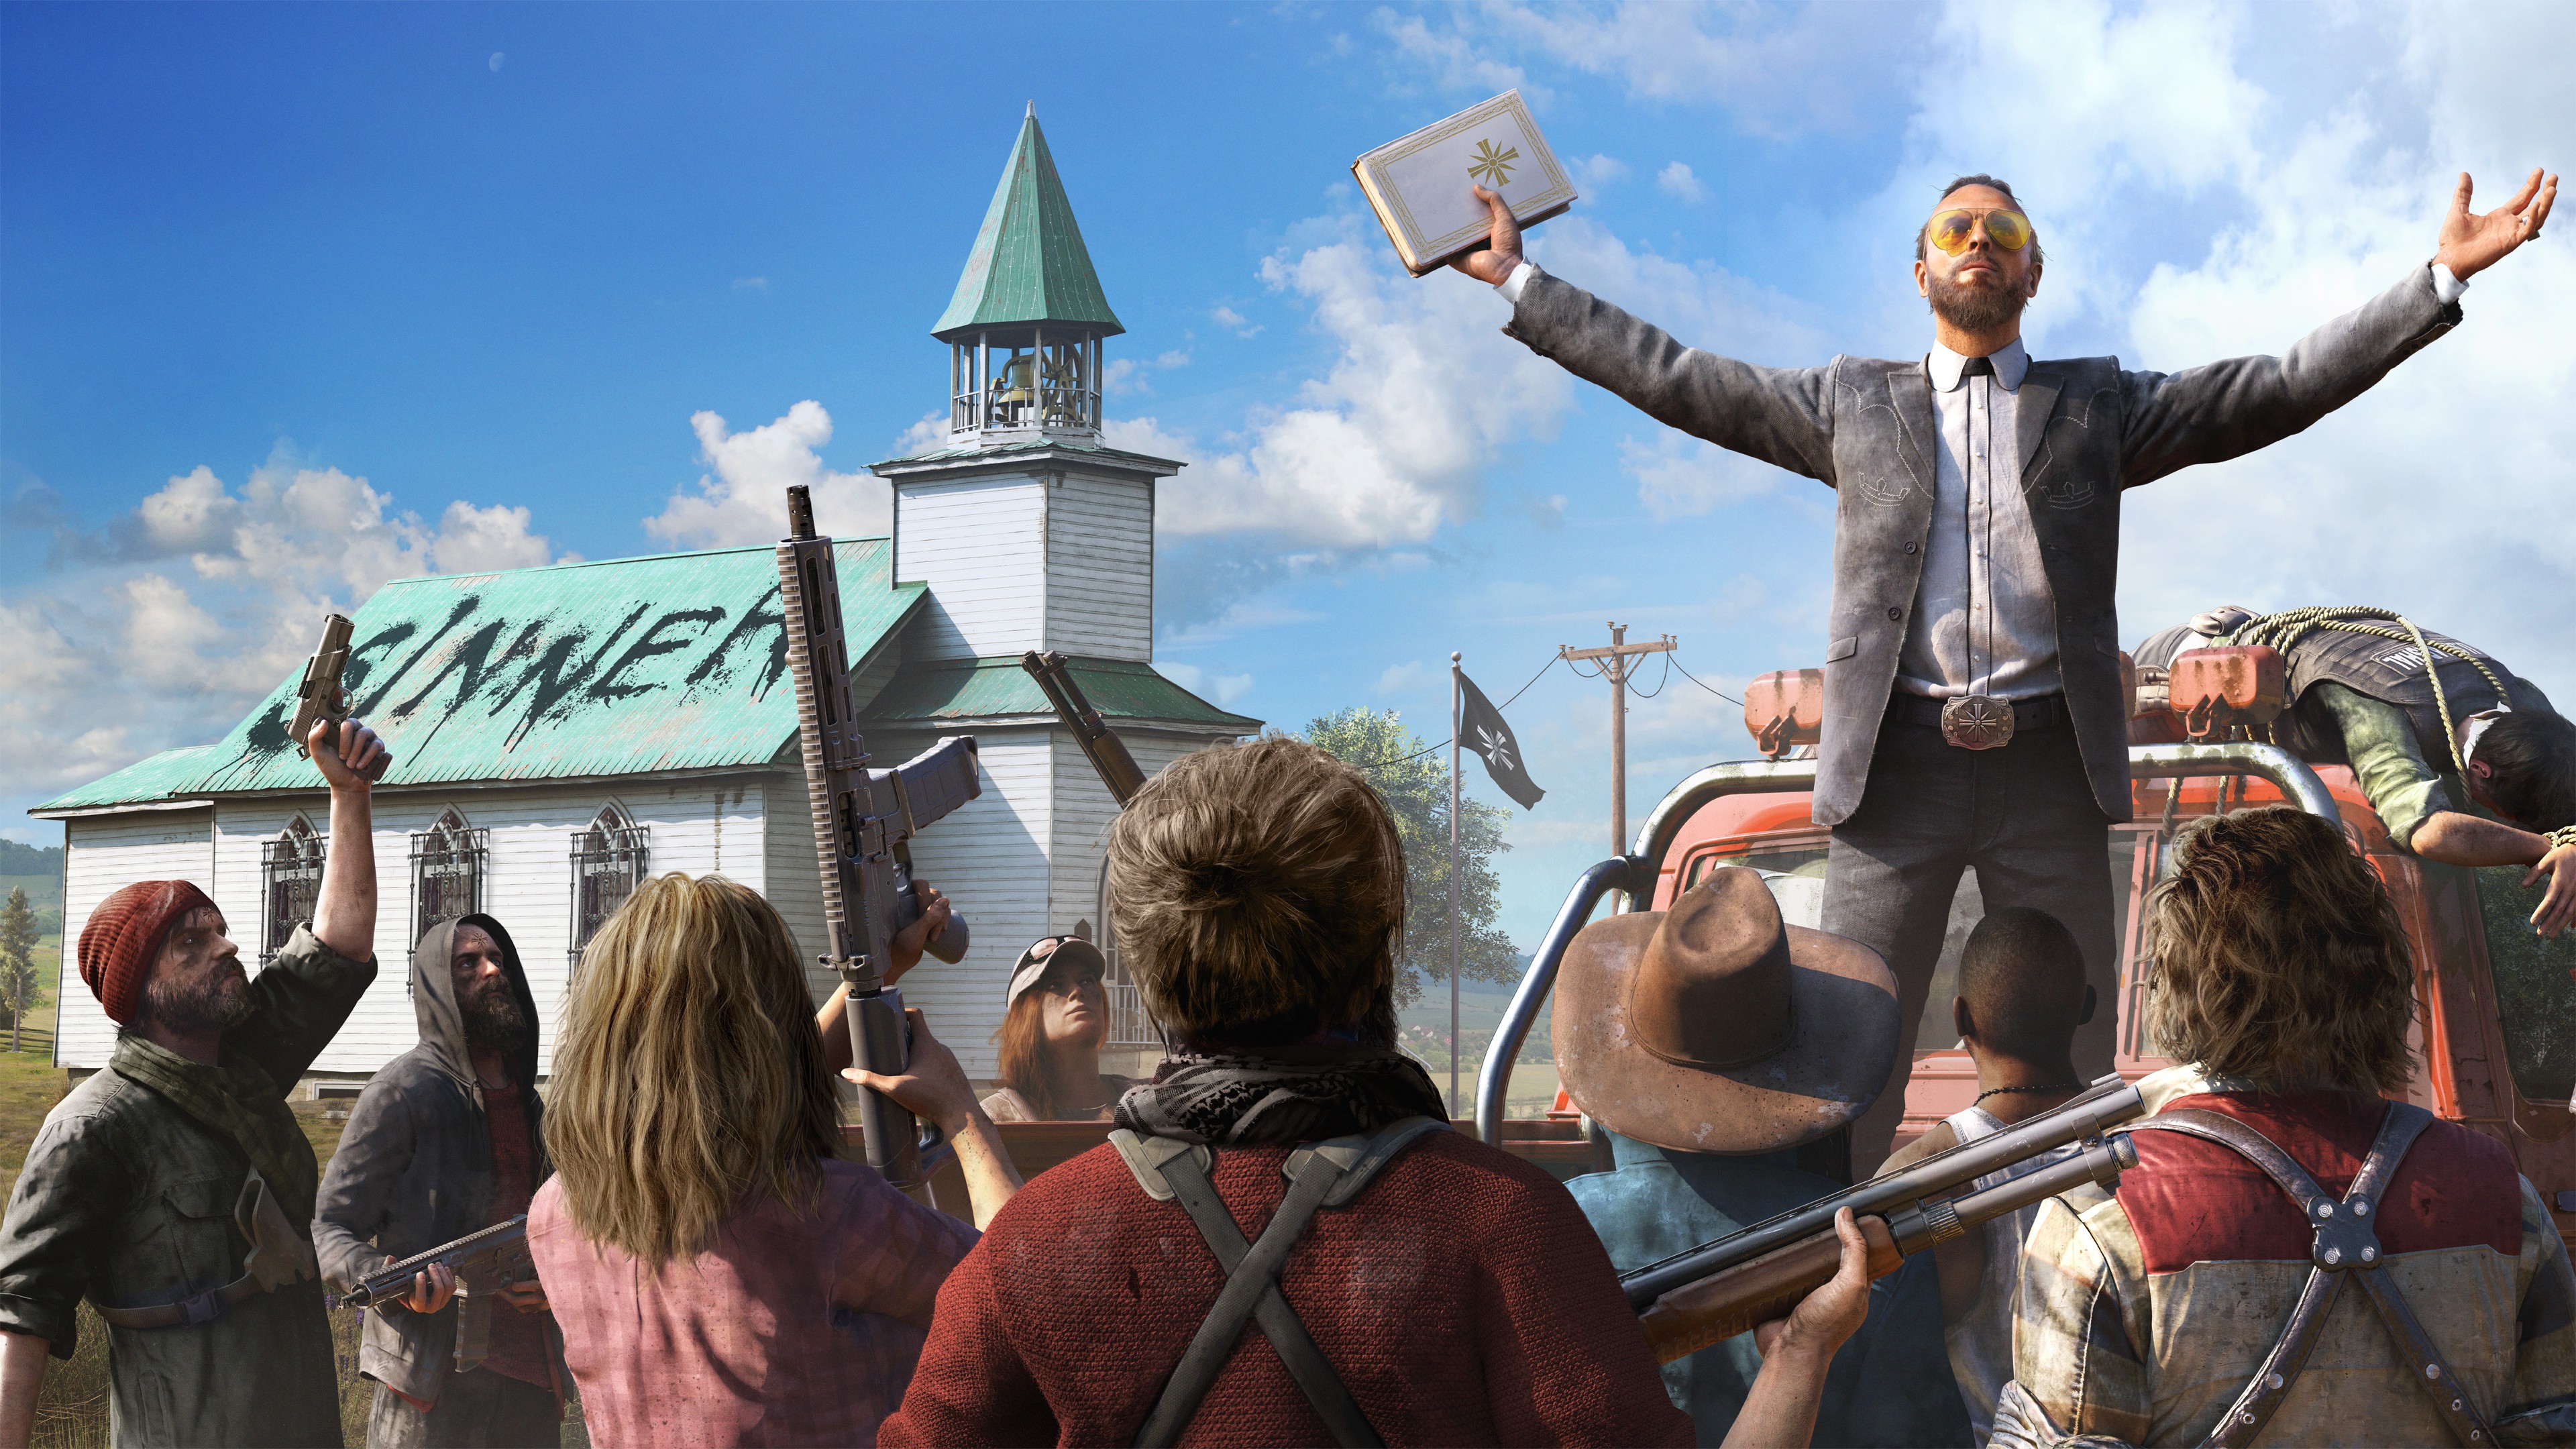 Far Cry 5 review – cults, chaos and all-American silliness, Games